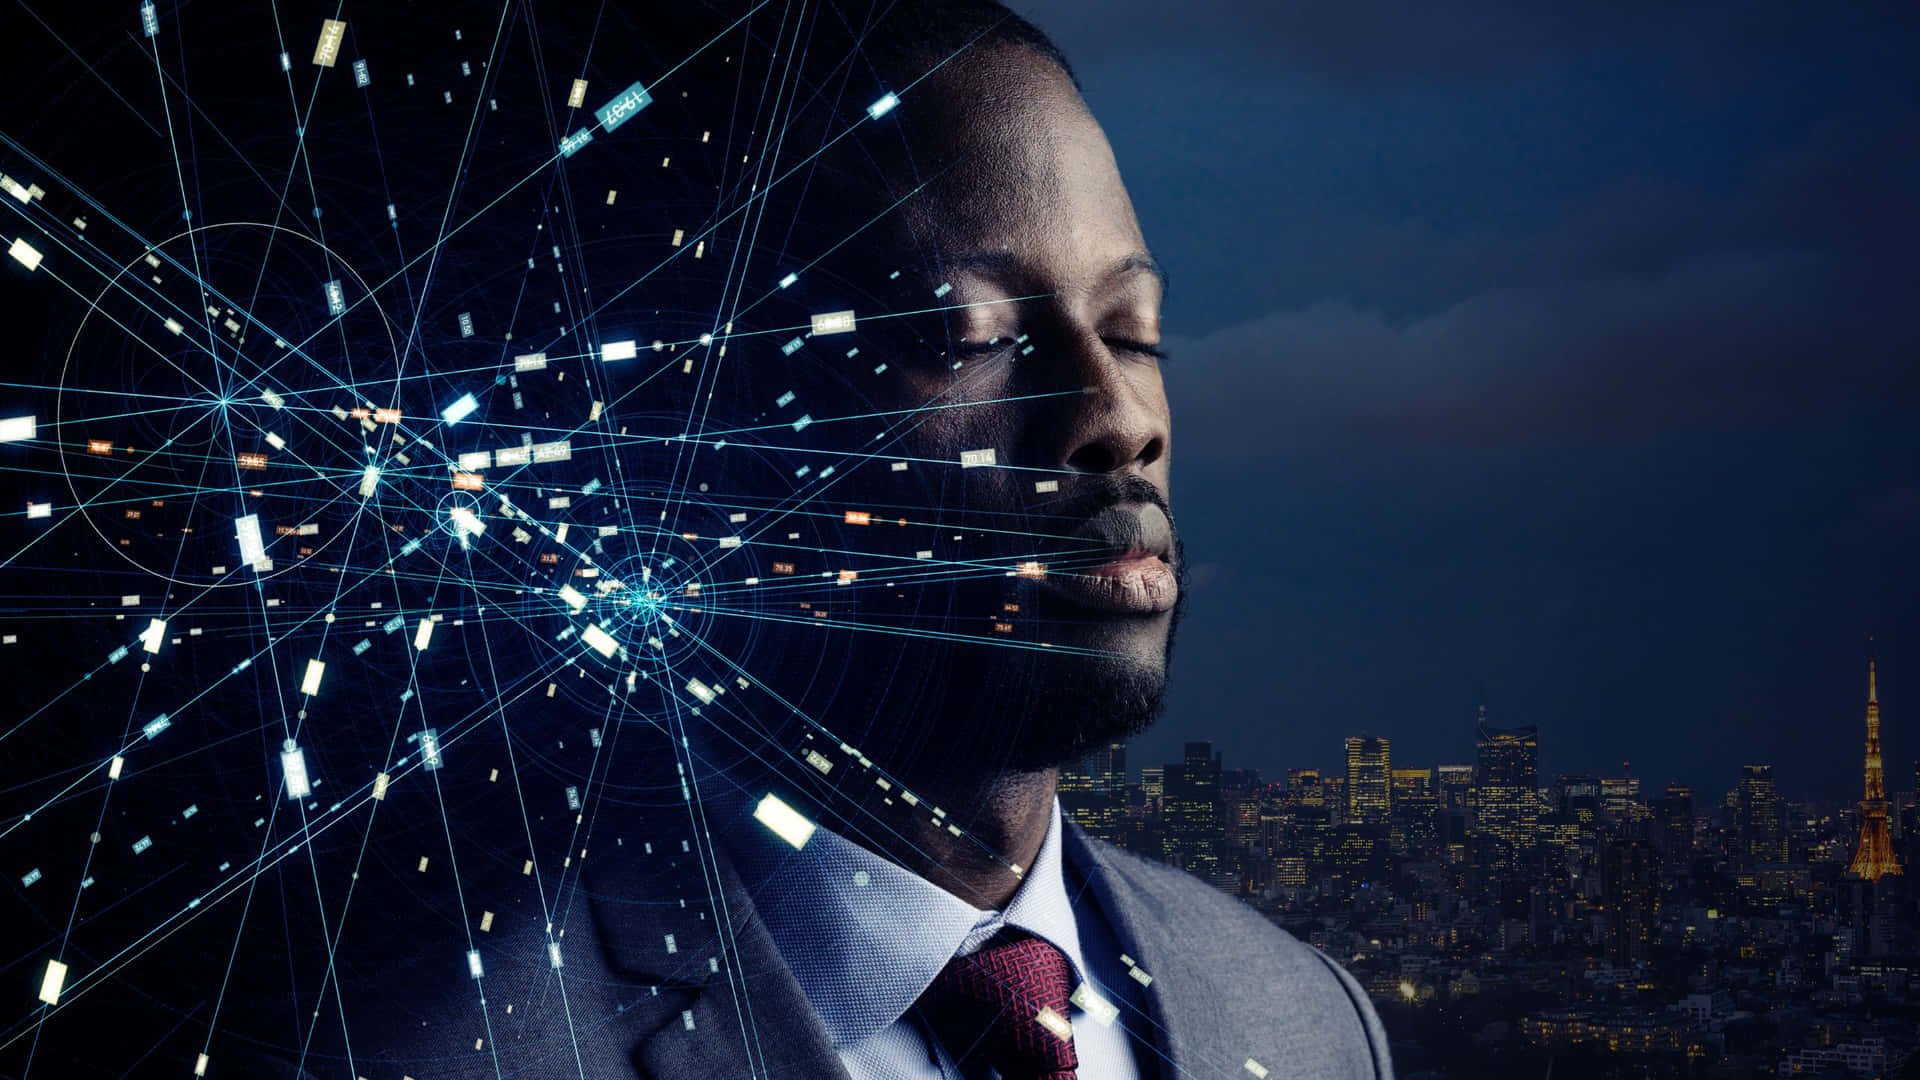 A Man In A Suit With A Network Of Lines On His Head